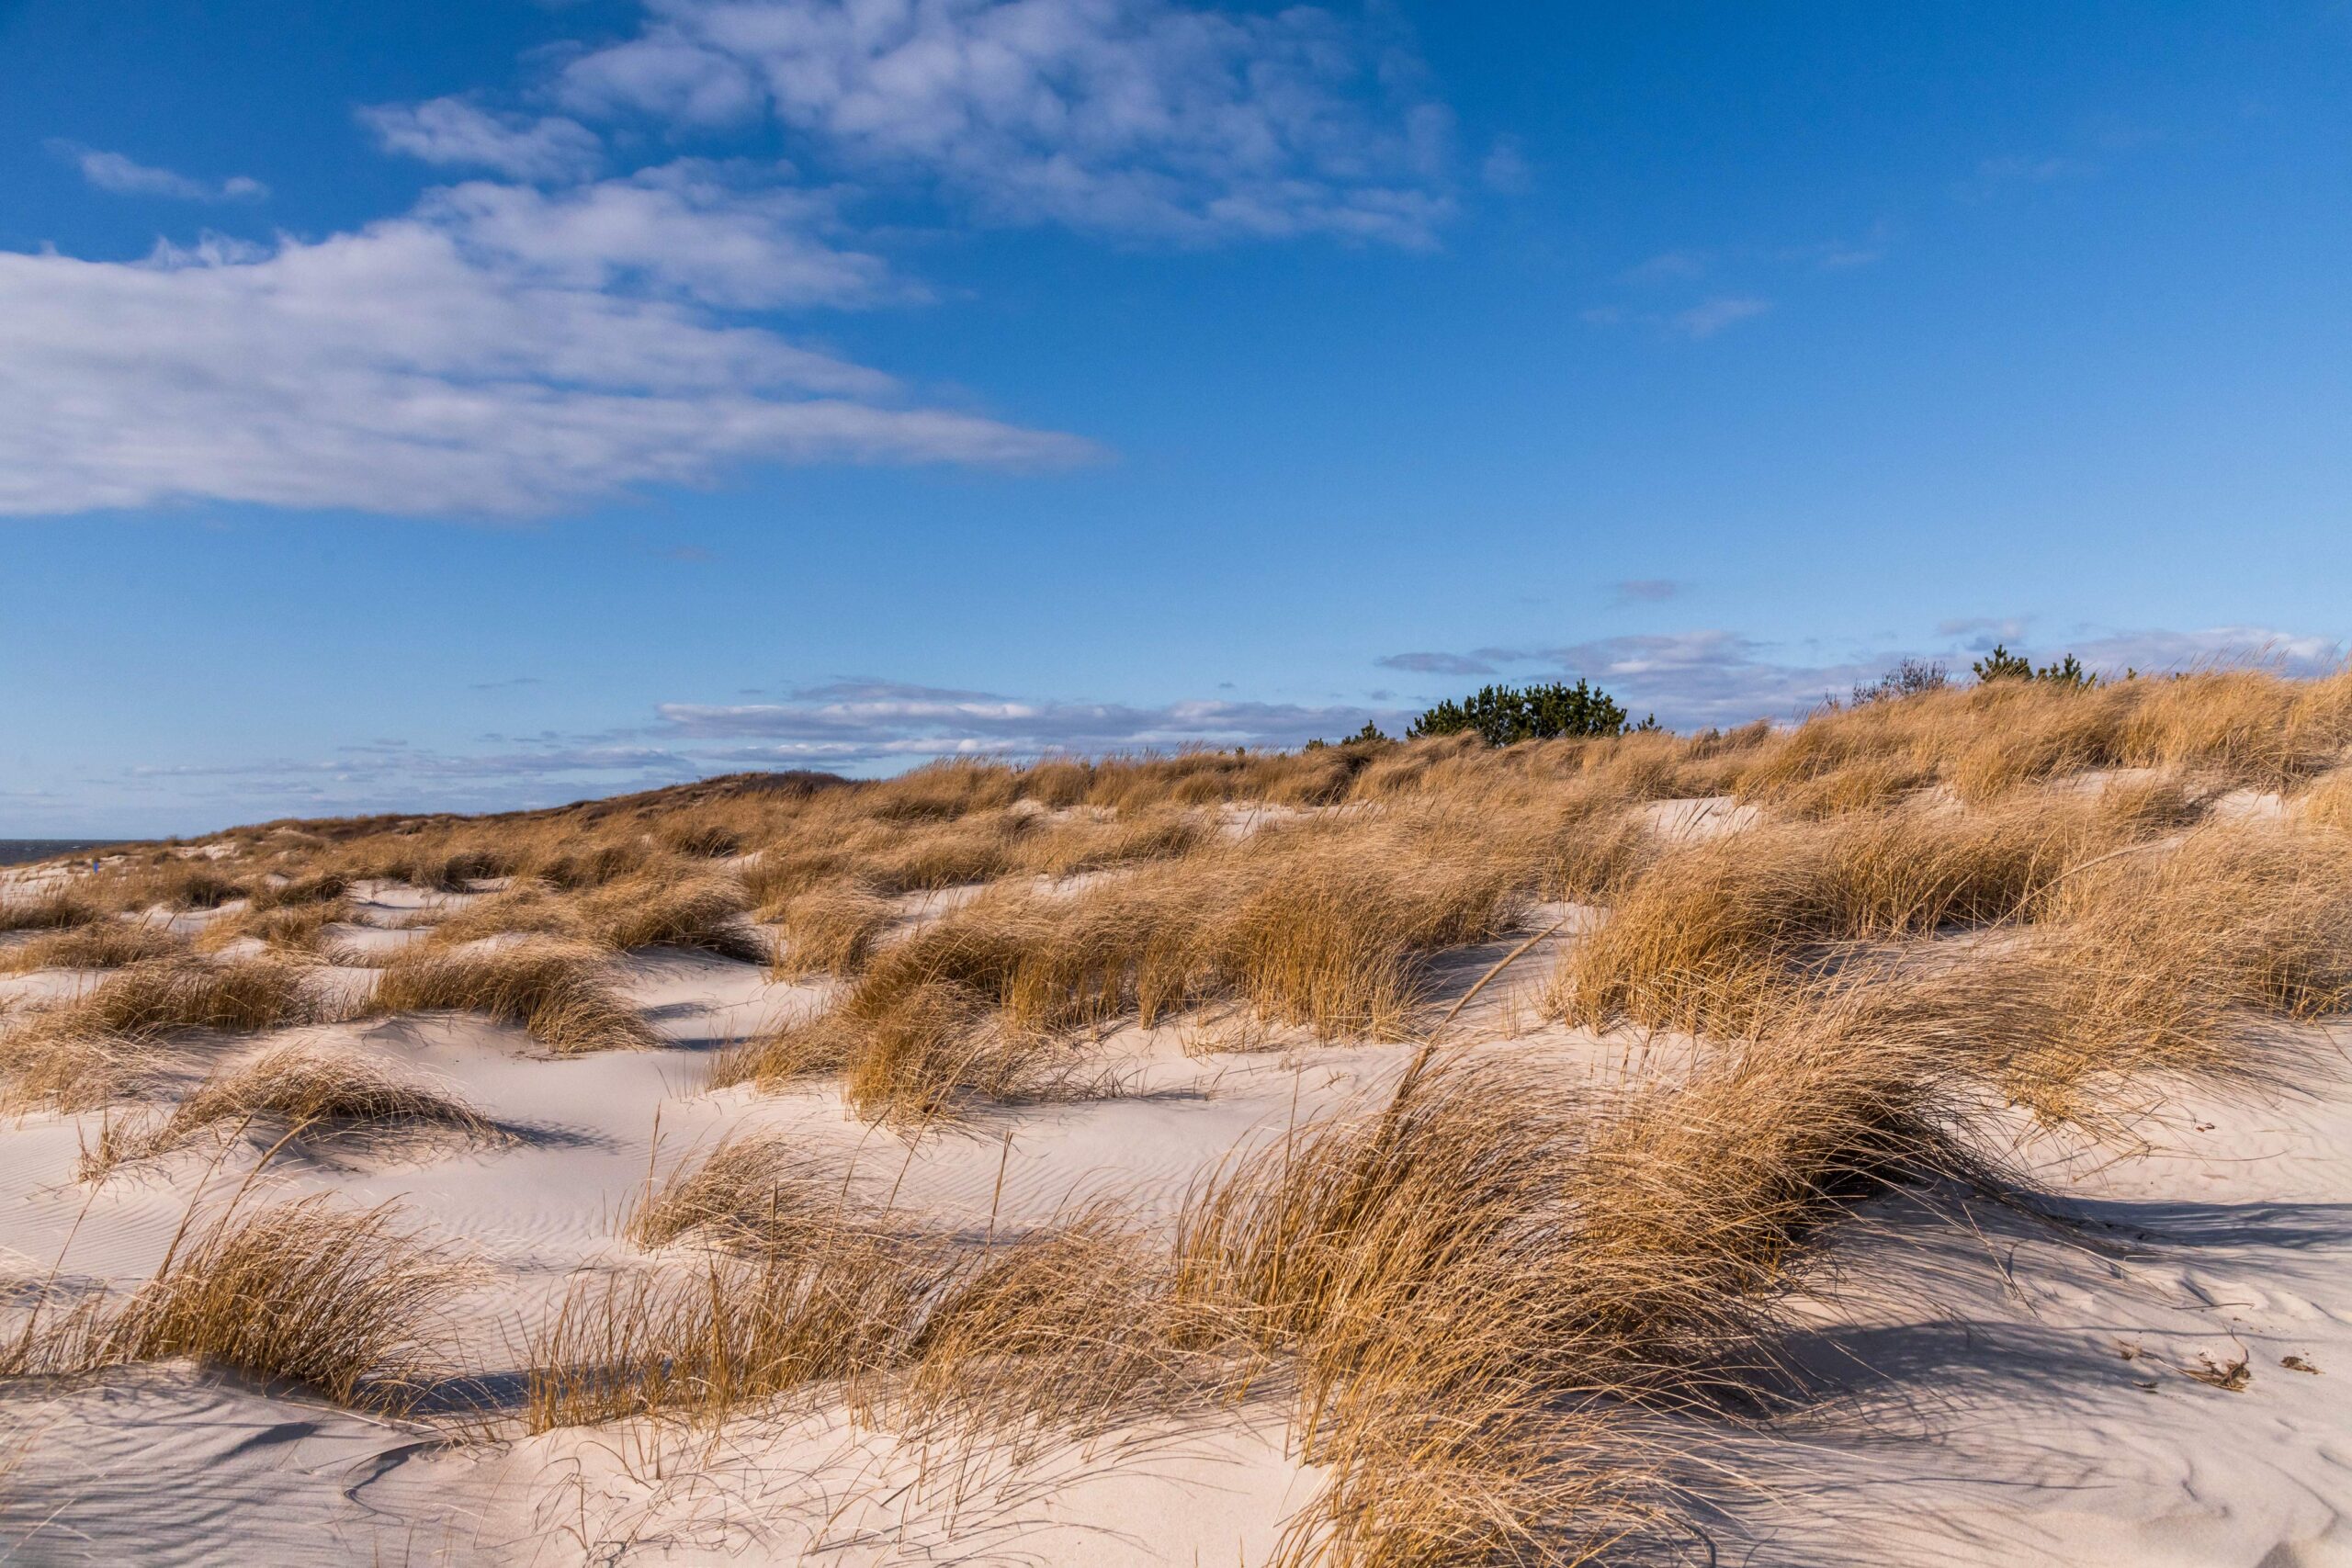 A hill of dunes and sand with a bright blue sky and a few thin puffy white clouds